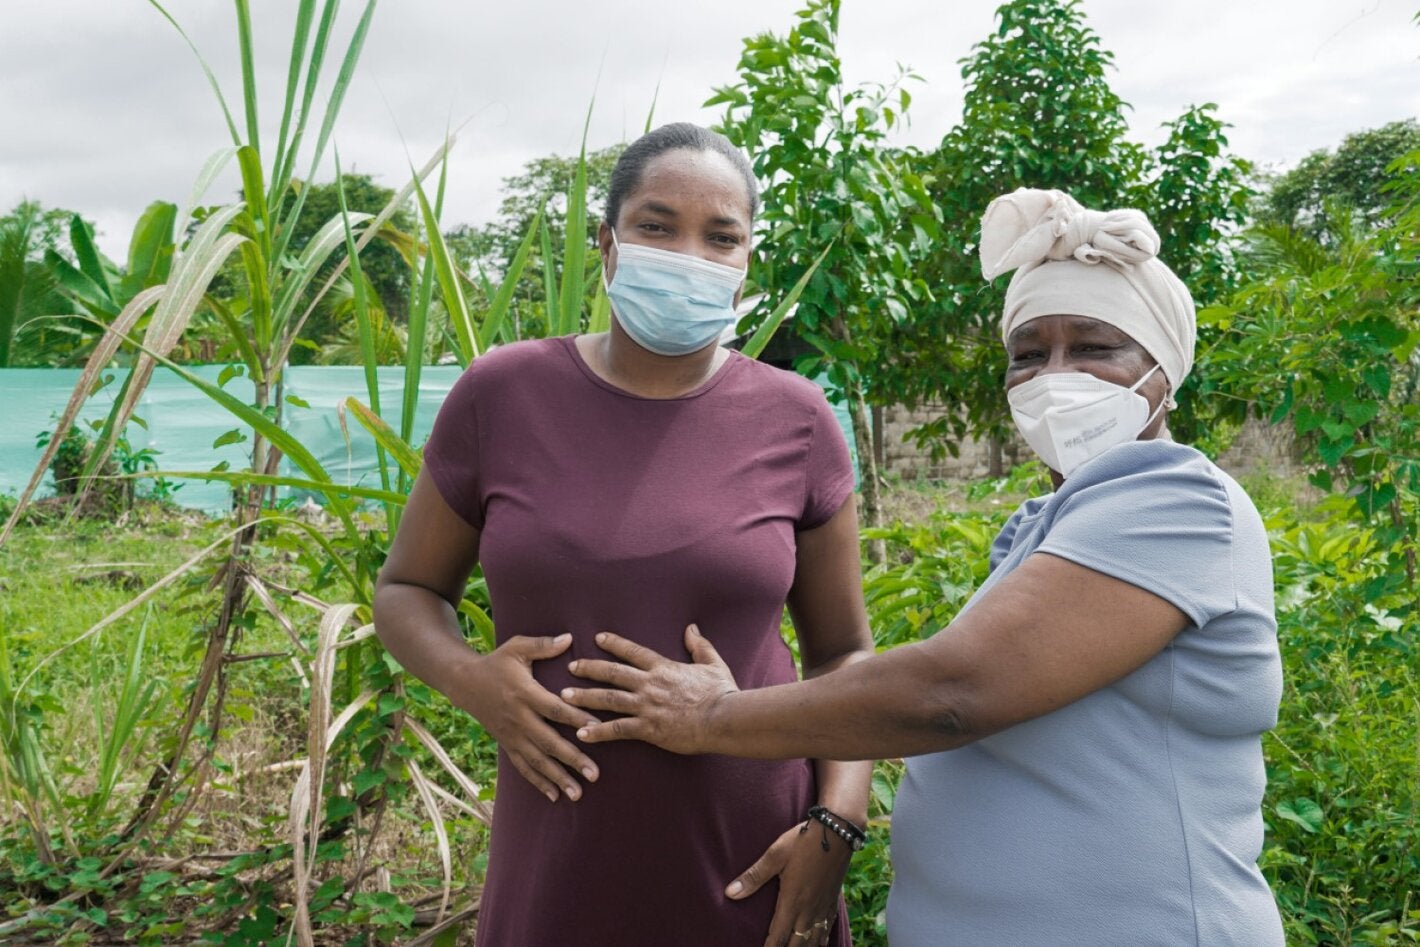 "My midwifery practice consists of helping bring lives into this world in successful and happy births," says Visitación Perea (left), who has been working as a traditional midwife for 45 years in the Department of Chocó, Colombia.